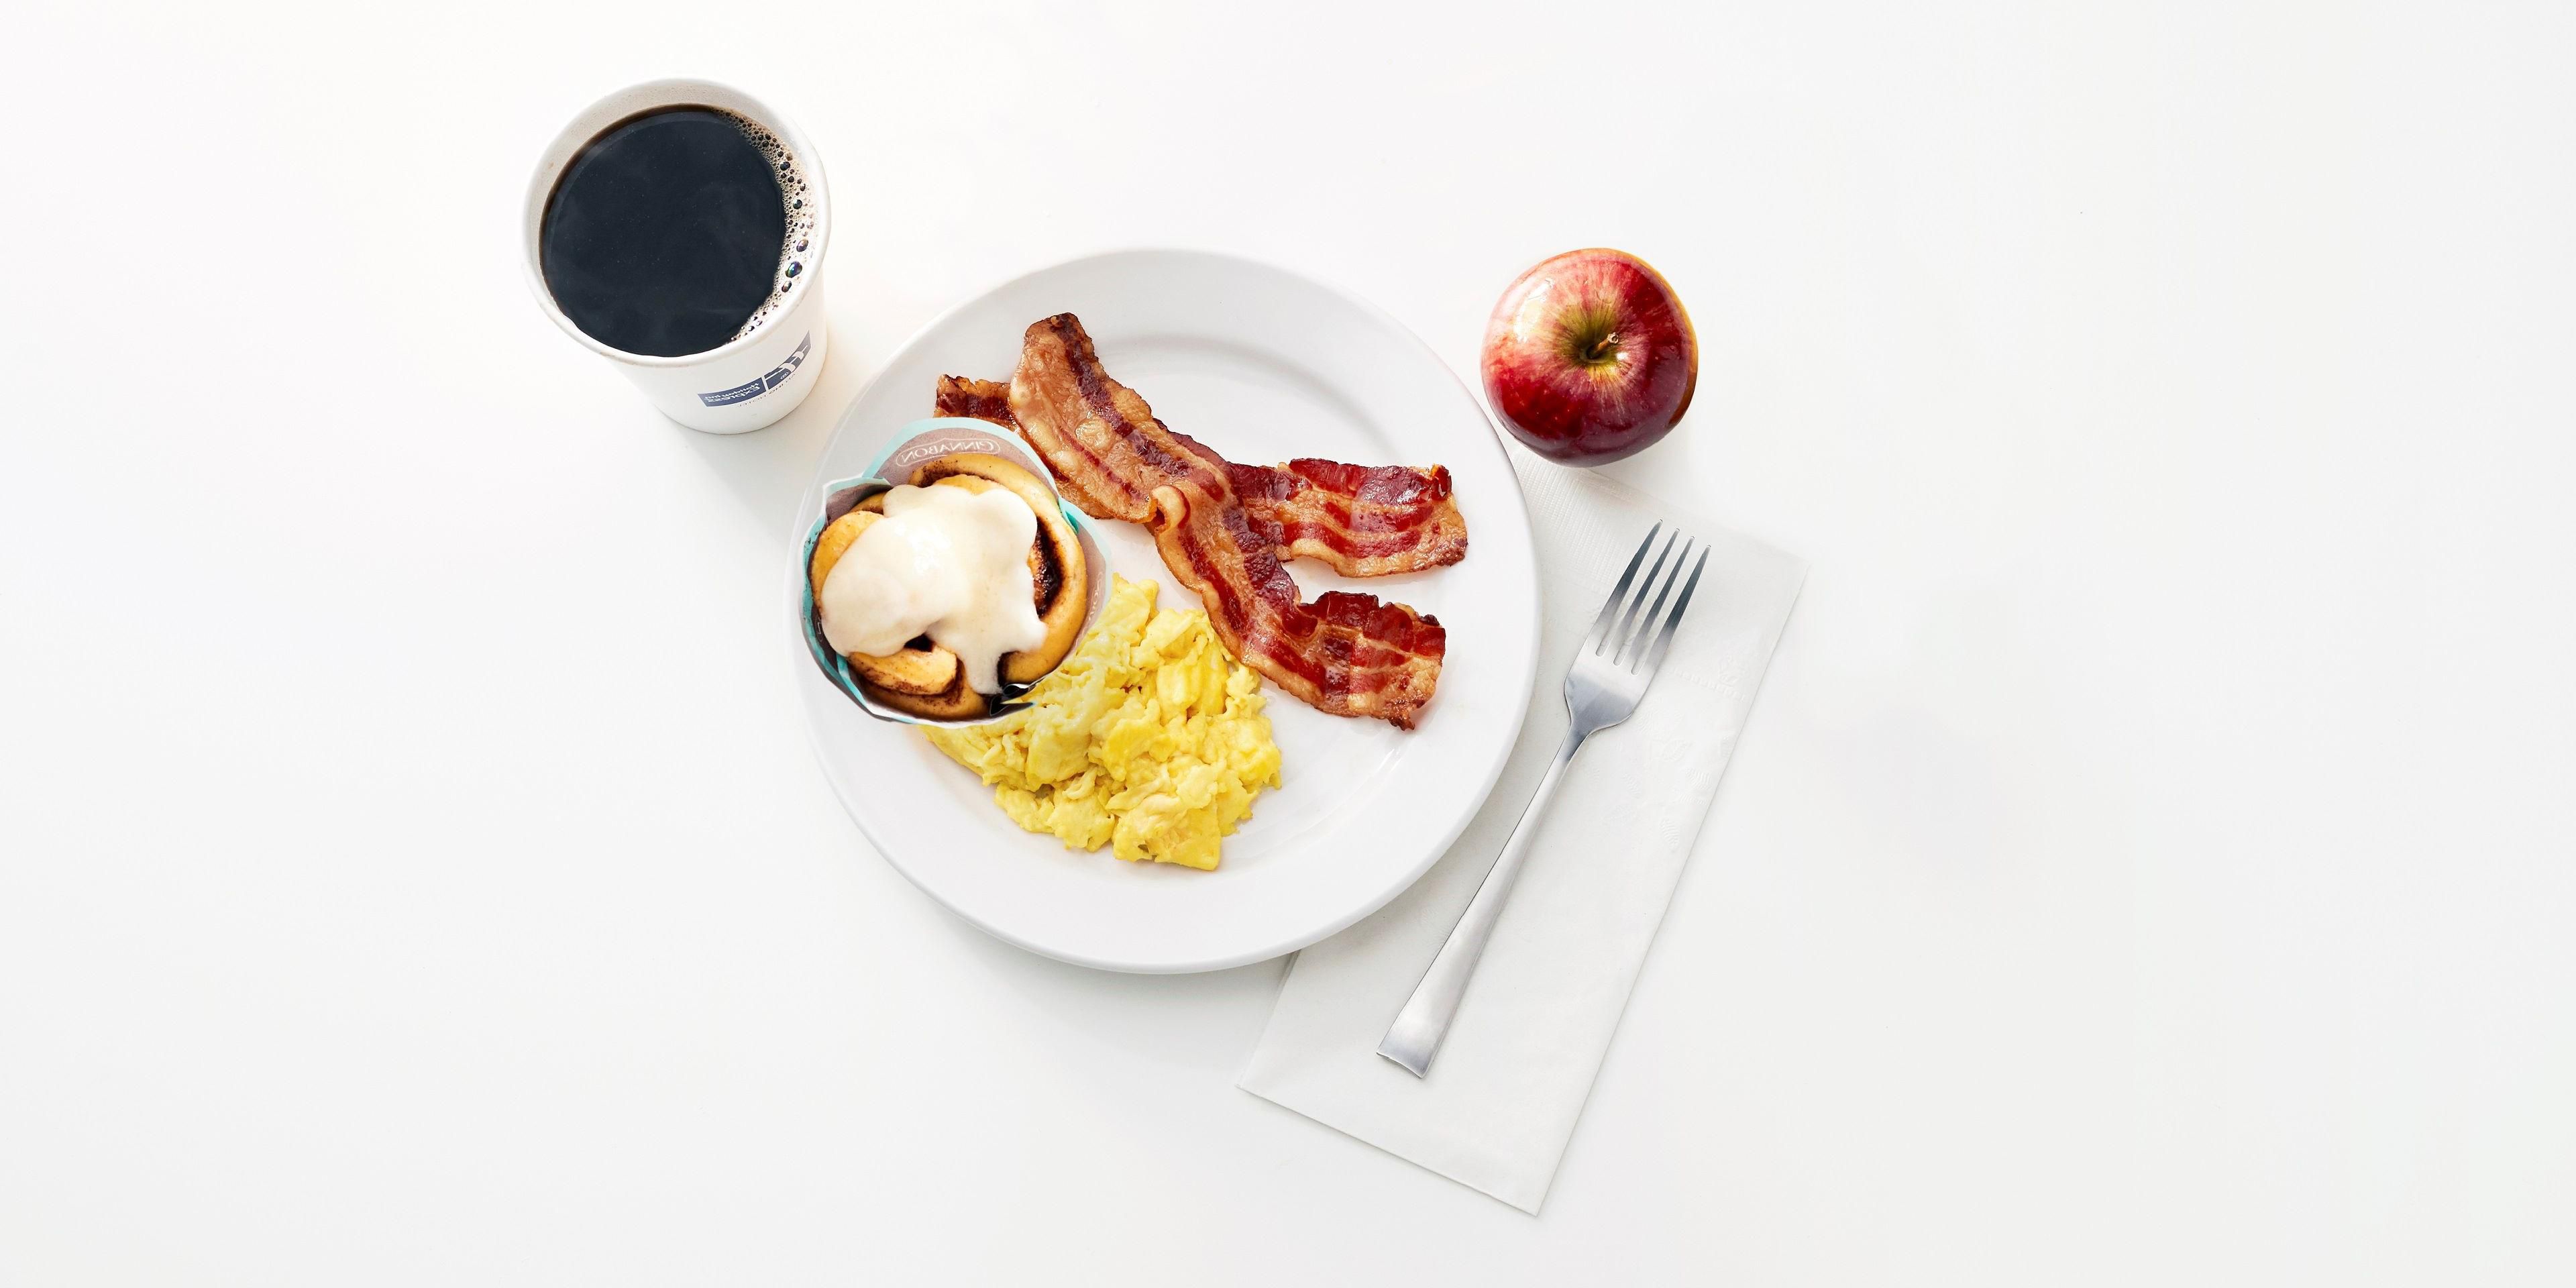 Kick start your day with our Express Start Breakfast, with grab ‘n’ go options and favorites such as eggs and bacon, hot pancakes, our signature cinnamon rolls and fresh coffee. Offered from 6AM-9:30AM from Monday to Saturday and 7AM-10AM on Sunday.